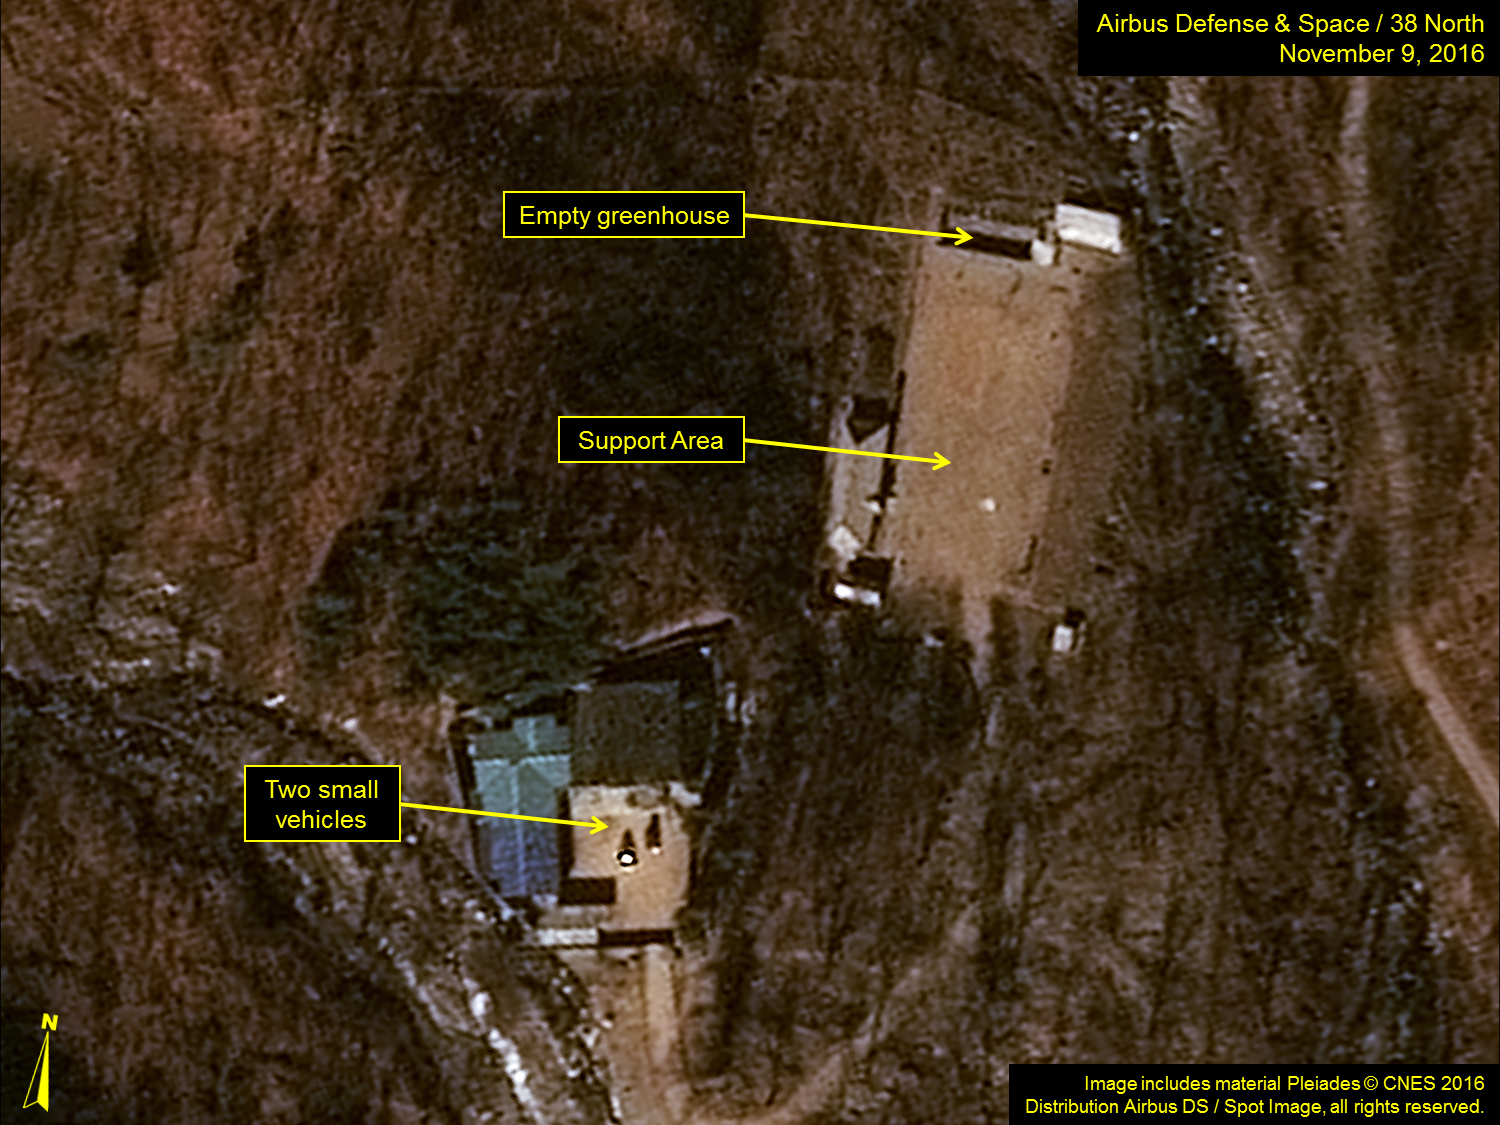 Punggye-ri Nuclear Test Site: No Indications that a Test is Imminent